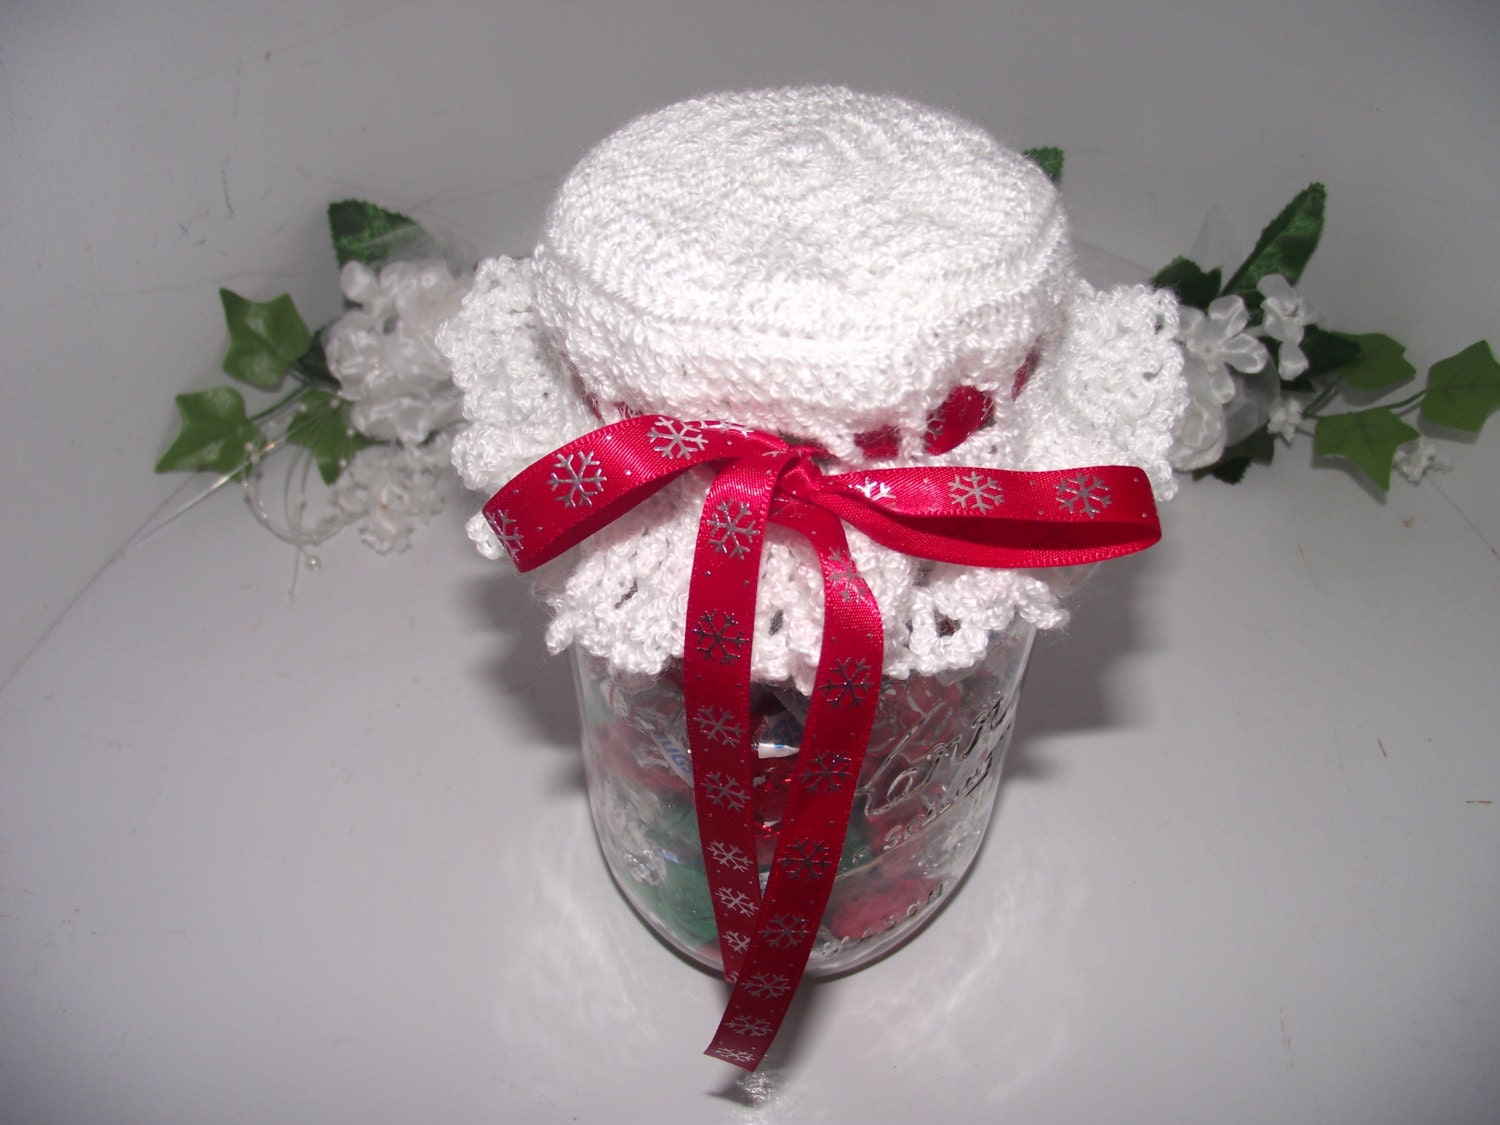 White Crochet jar lid cover with ribon